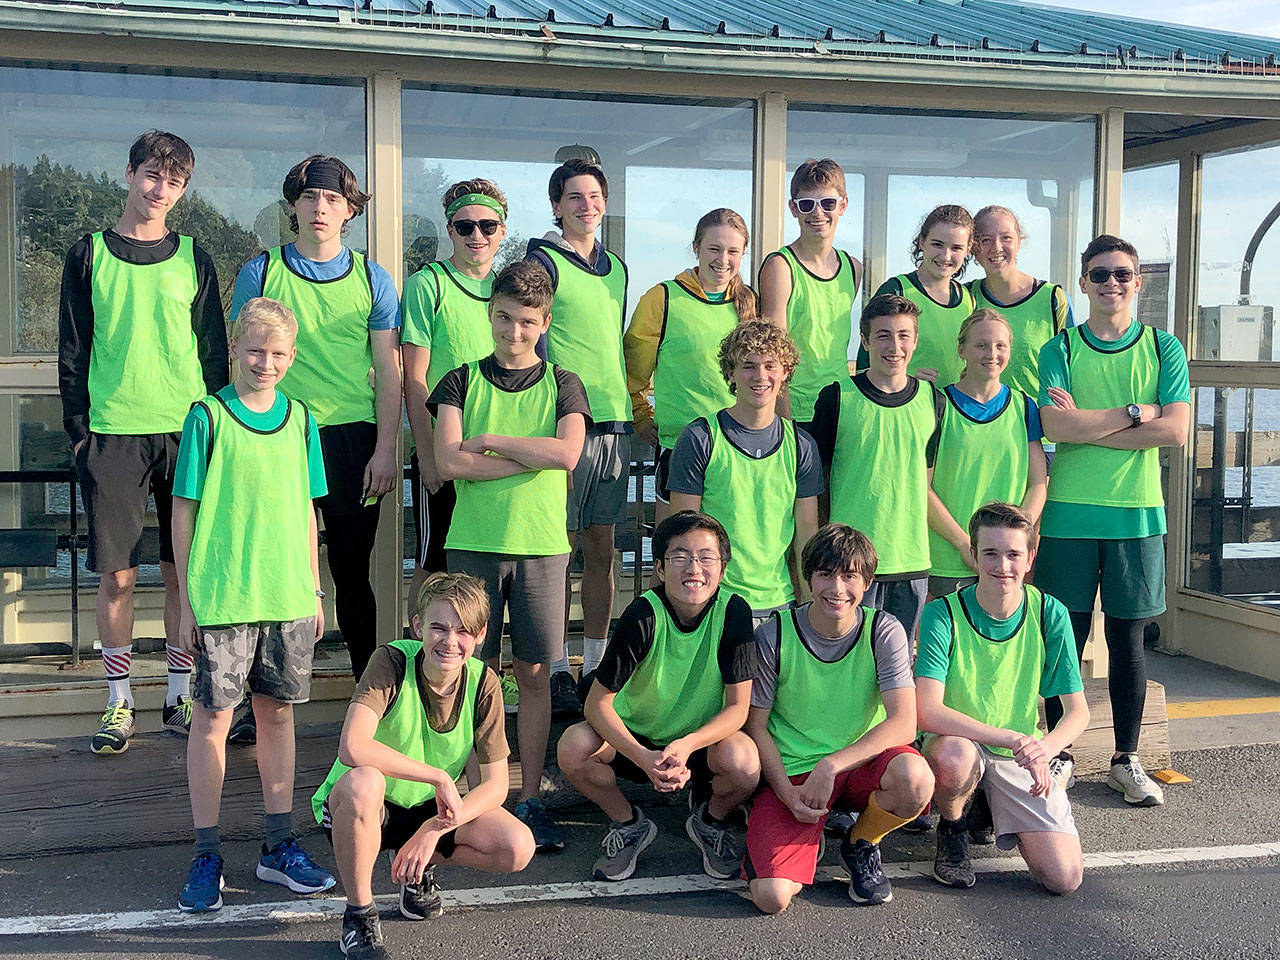 The Vashon Island High School cross country team stands at the entrance of the Tahlequah ferry terminal on Thursday, Nov. 7, for the Dock2Dock competition (Courtesy Photo)